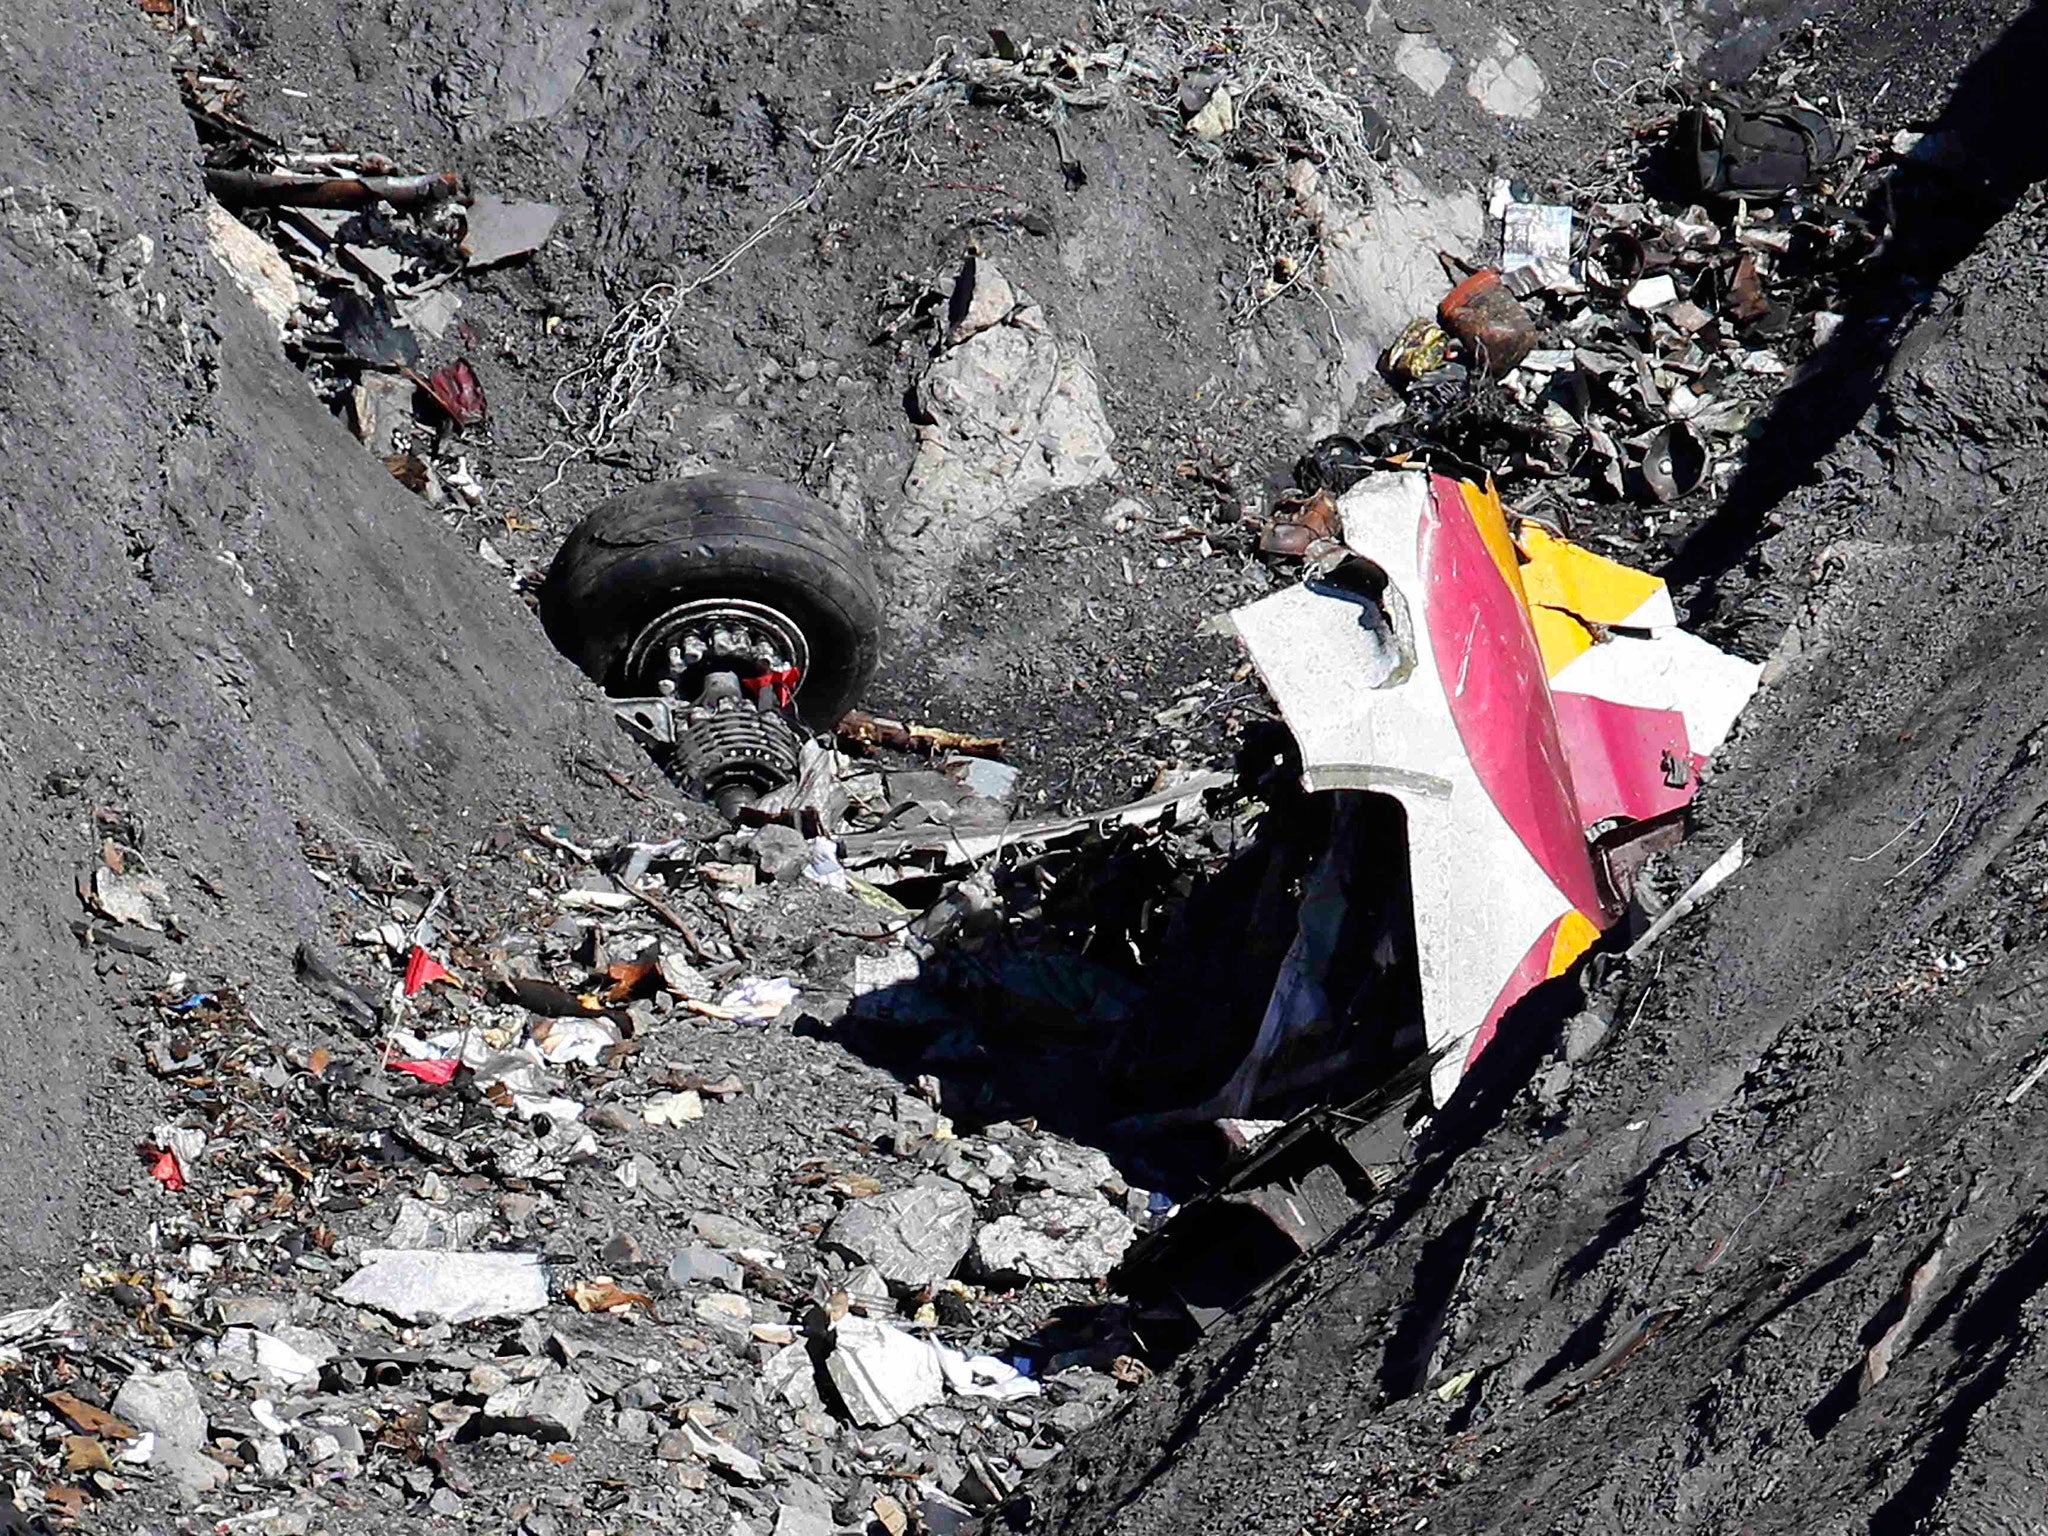 Wreckage of the Airbus A320 is seen at the site of the crash, near Seyne-les-Alpes, French Alps